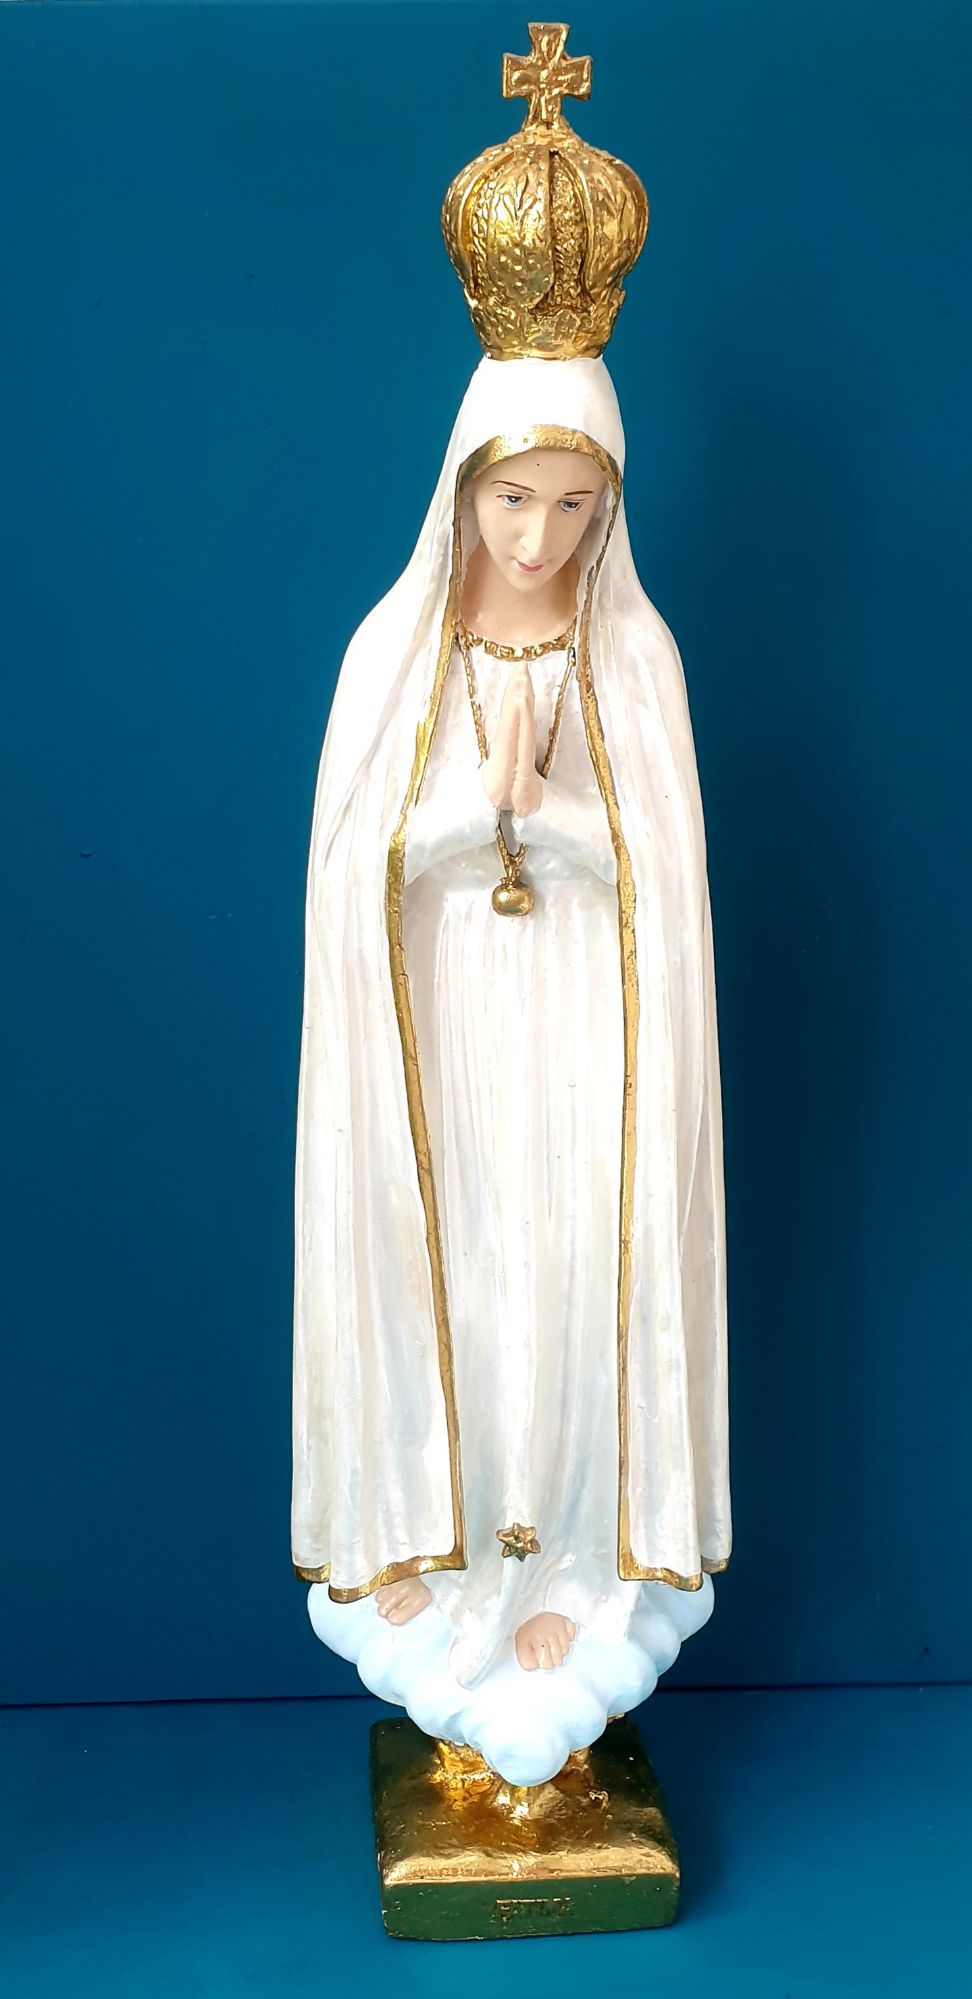 Our Lady Of Fatima Blessed Virgin Mother Mary Catholic Religious